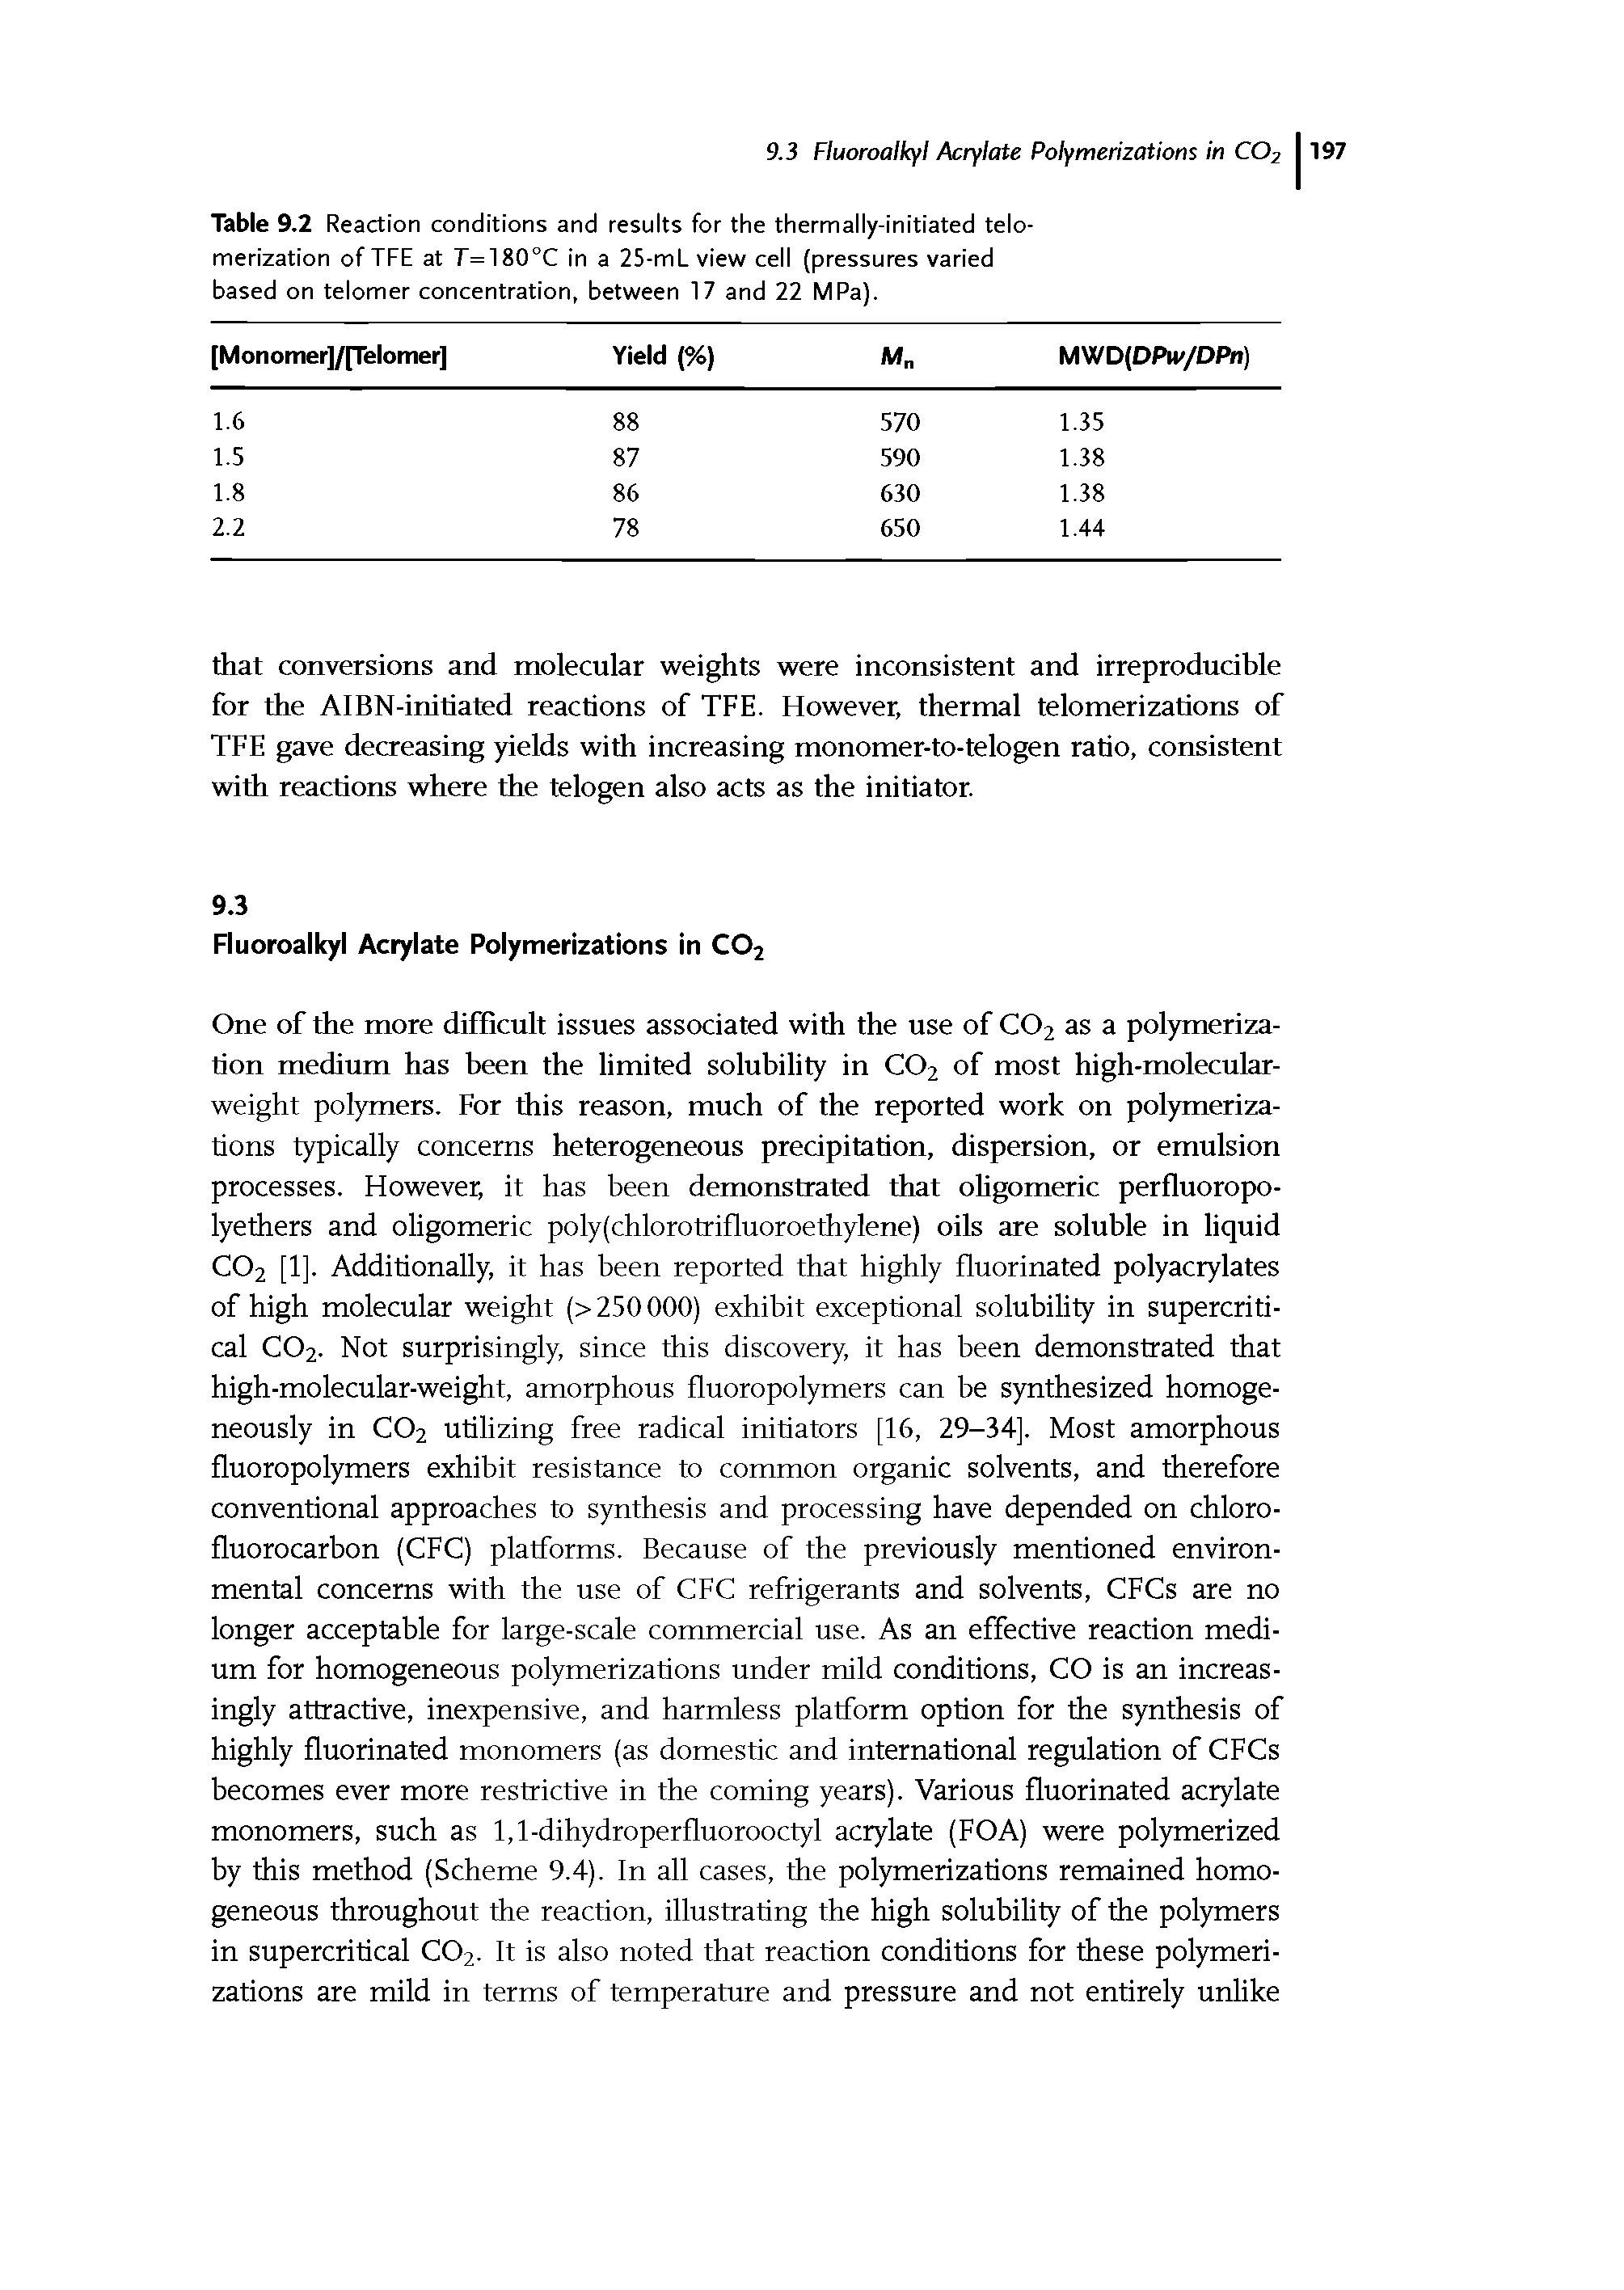 Table 9.2 Reaction conditions and results for the thermally-initiated telo-merization ofTFE at 7=180°C in a 25-mL view cell (pressures varied based on telomer concentration, between 17 and 22 MPa).